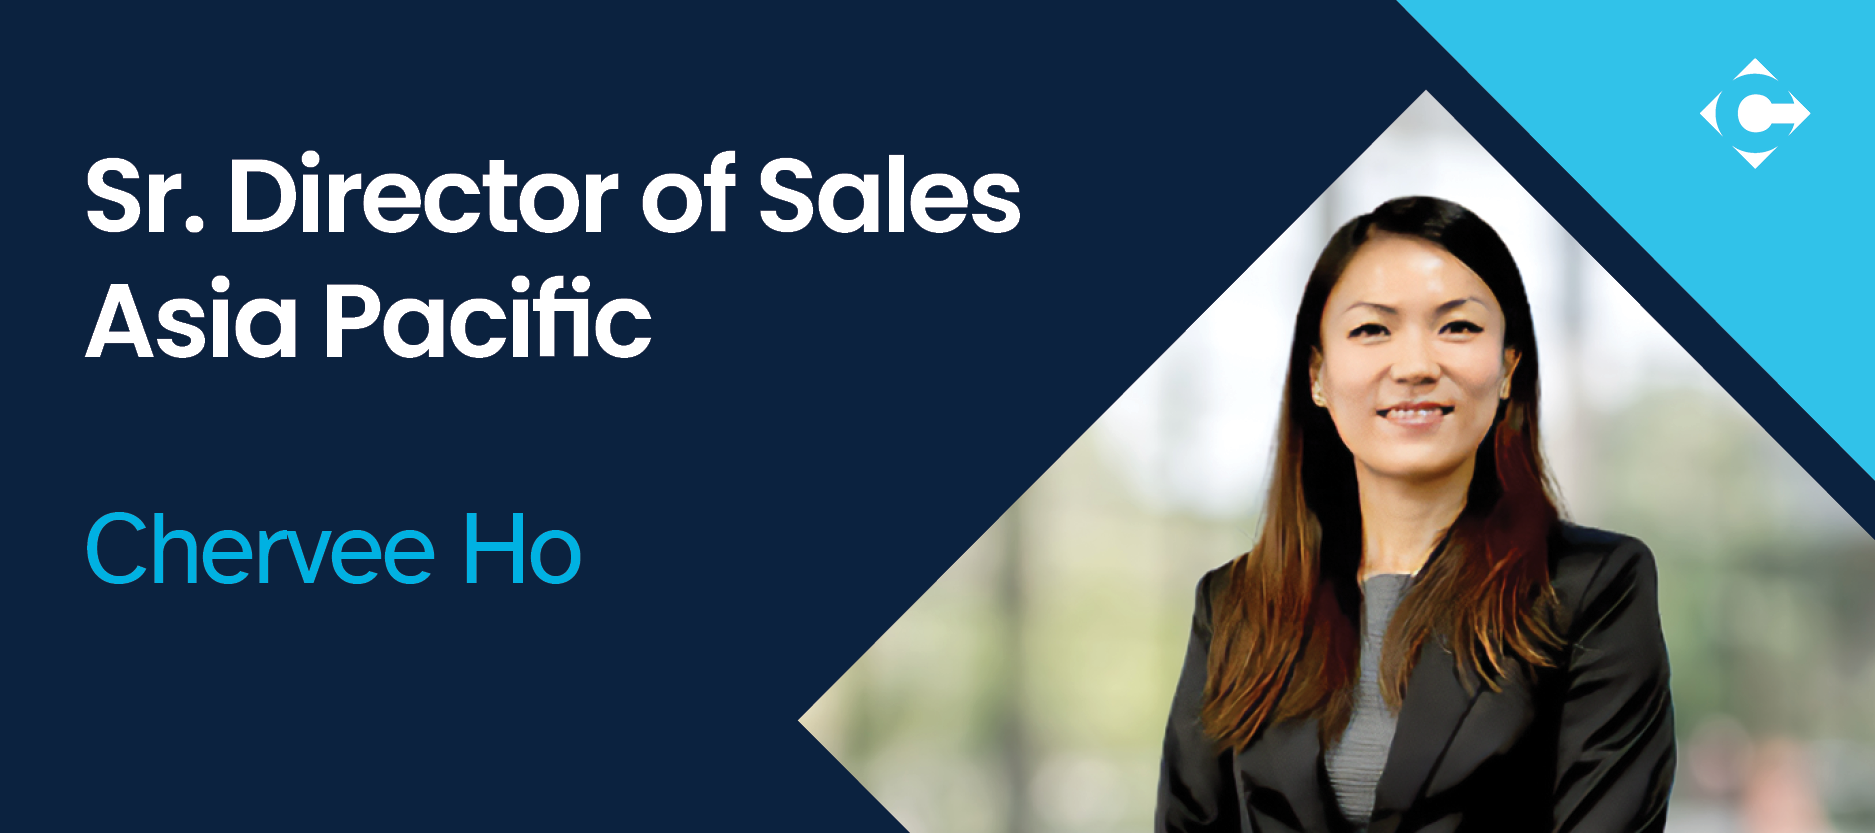 Sr. Director of Sales, Asia Pacific, Chervee Ho